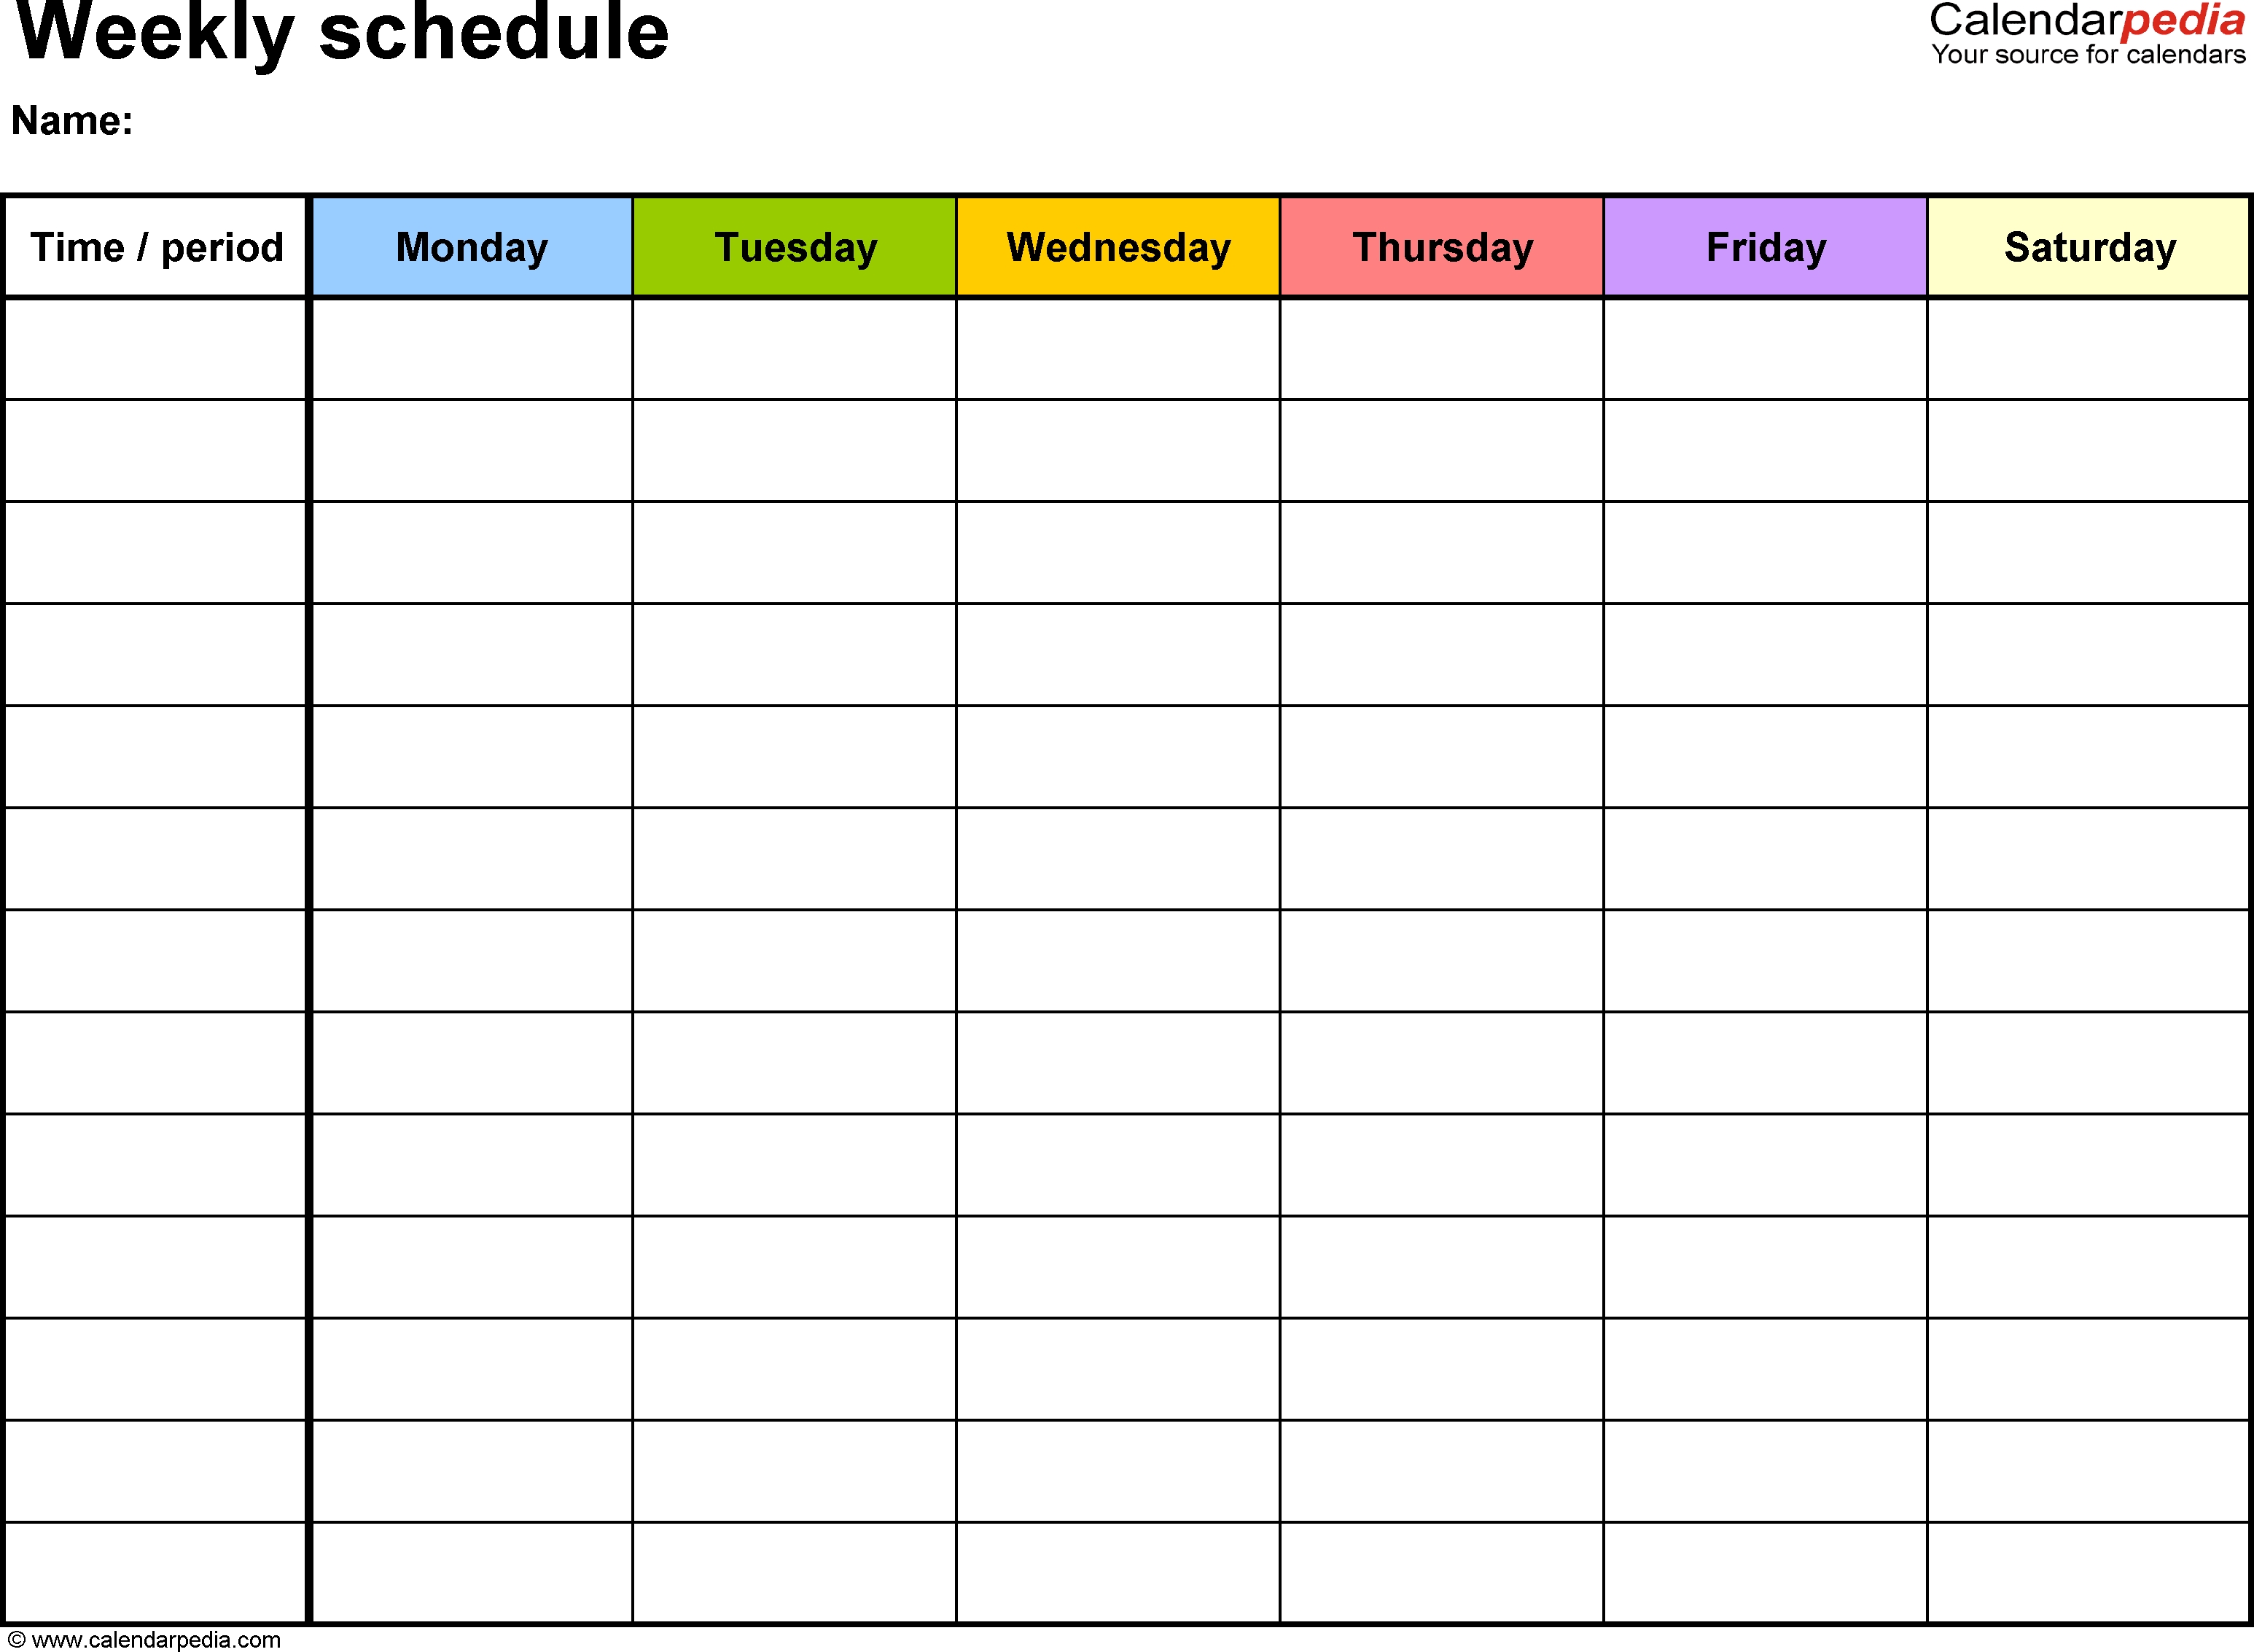 Free Weekly Schedule Templates For Word - 18 Templates-Blank Monday Through Friday Calendars